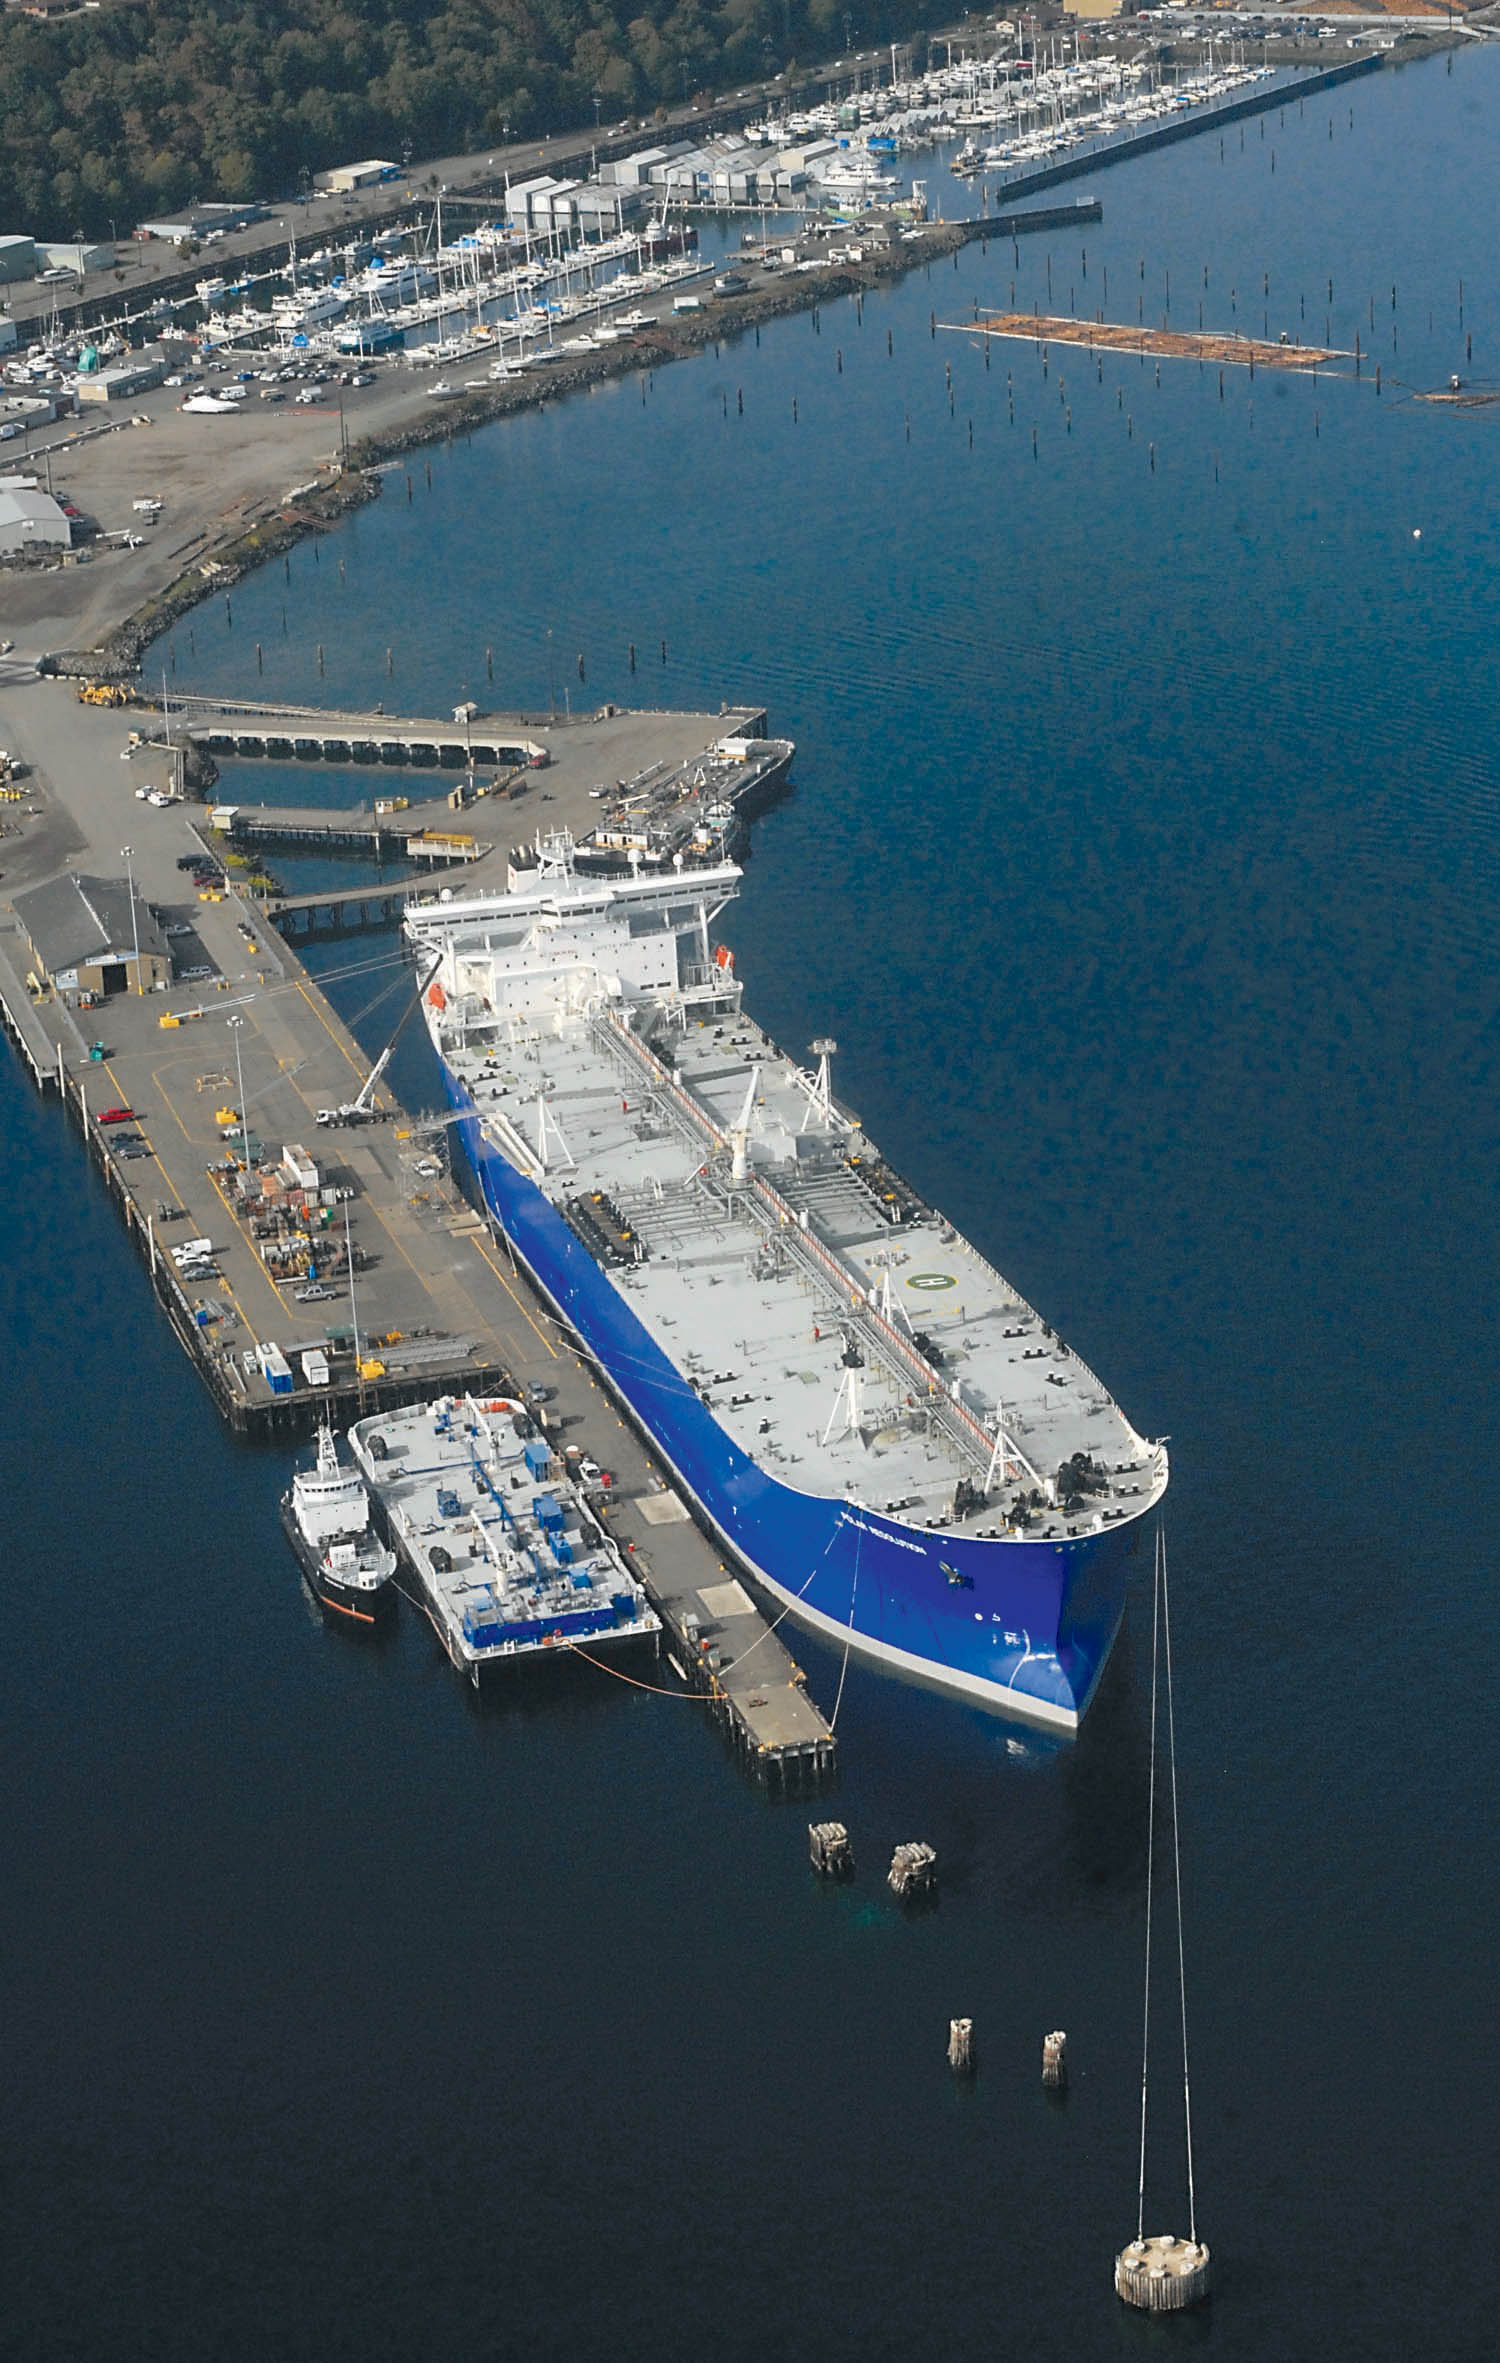 The tanker Polar Resolution sits moored at the Port of Port Angeles Terminal 1 pier on Thursday as seen in this aerial photo.  —Photo by Keith Thorpe/Peninsula Daily News